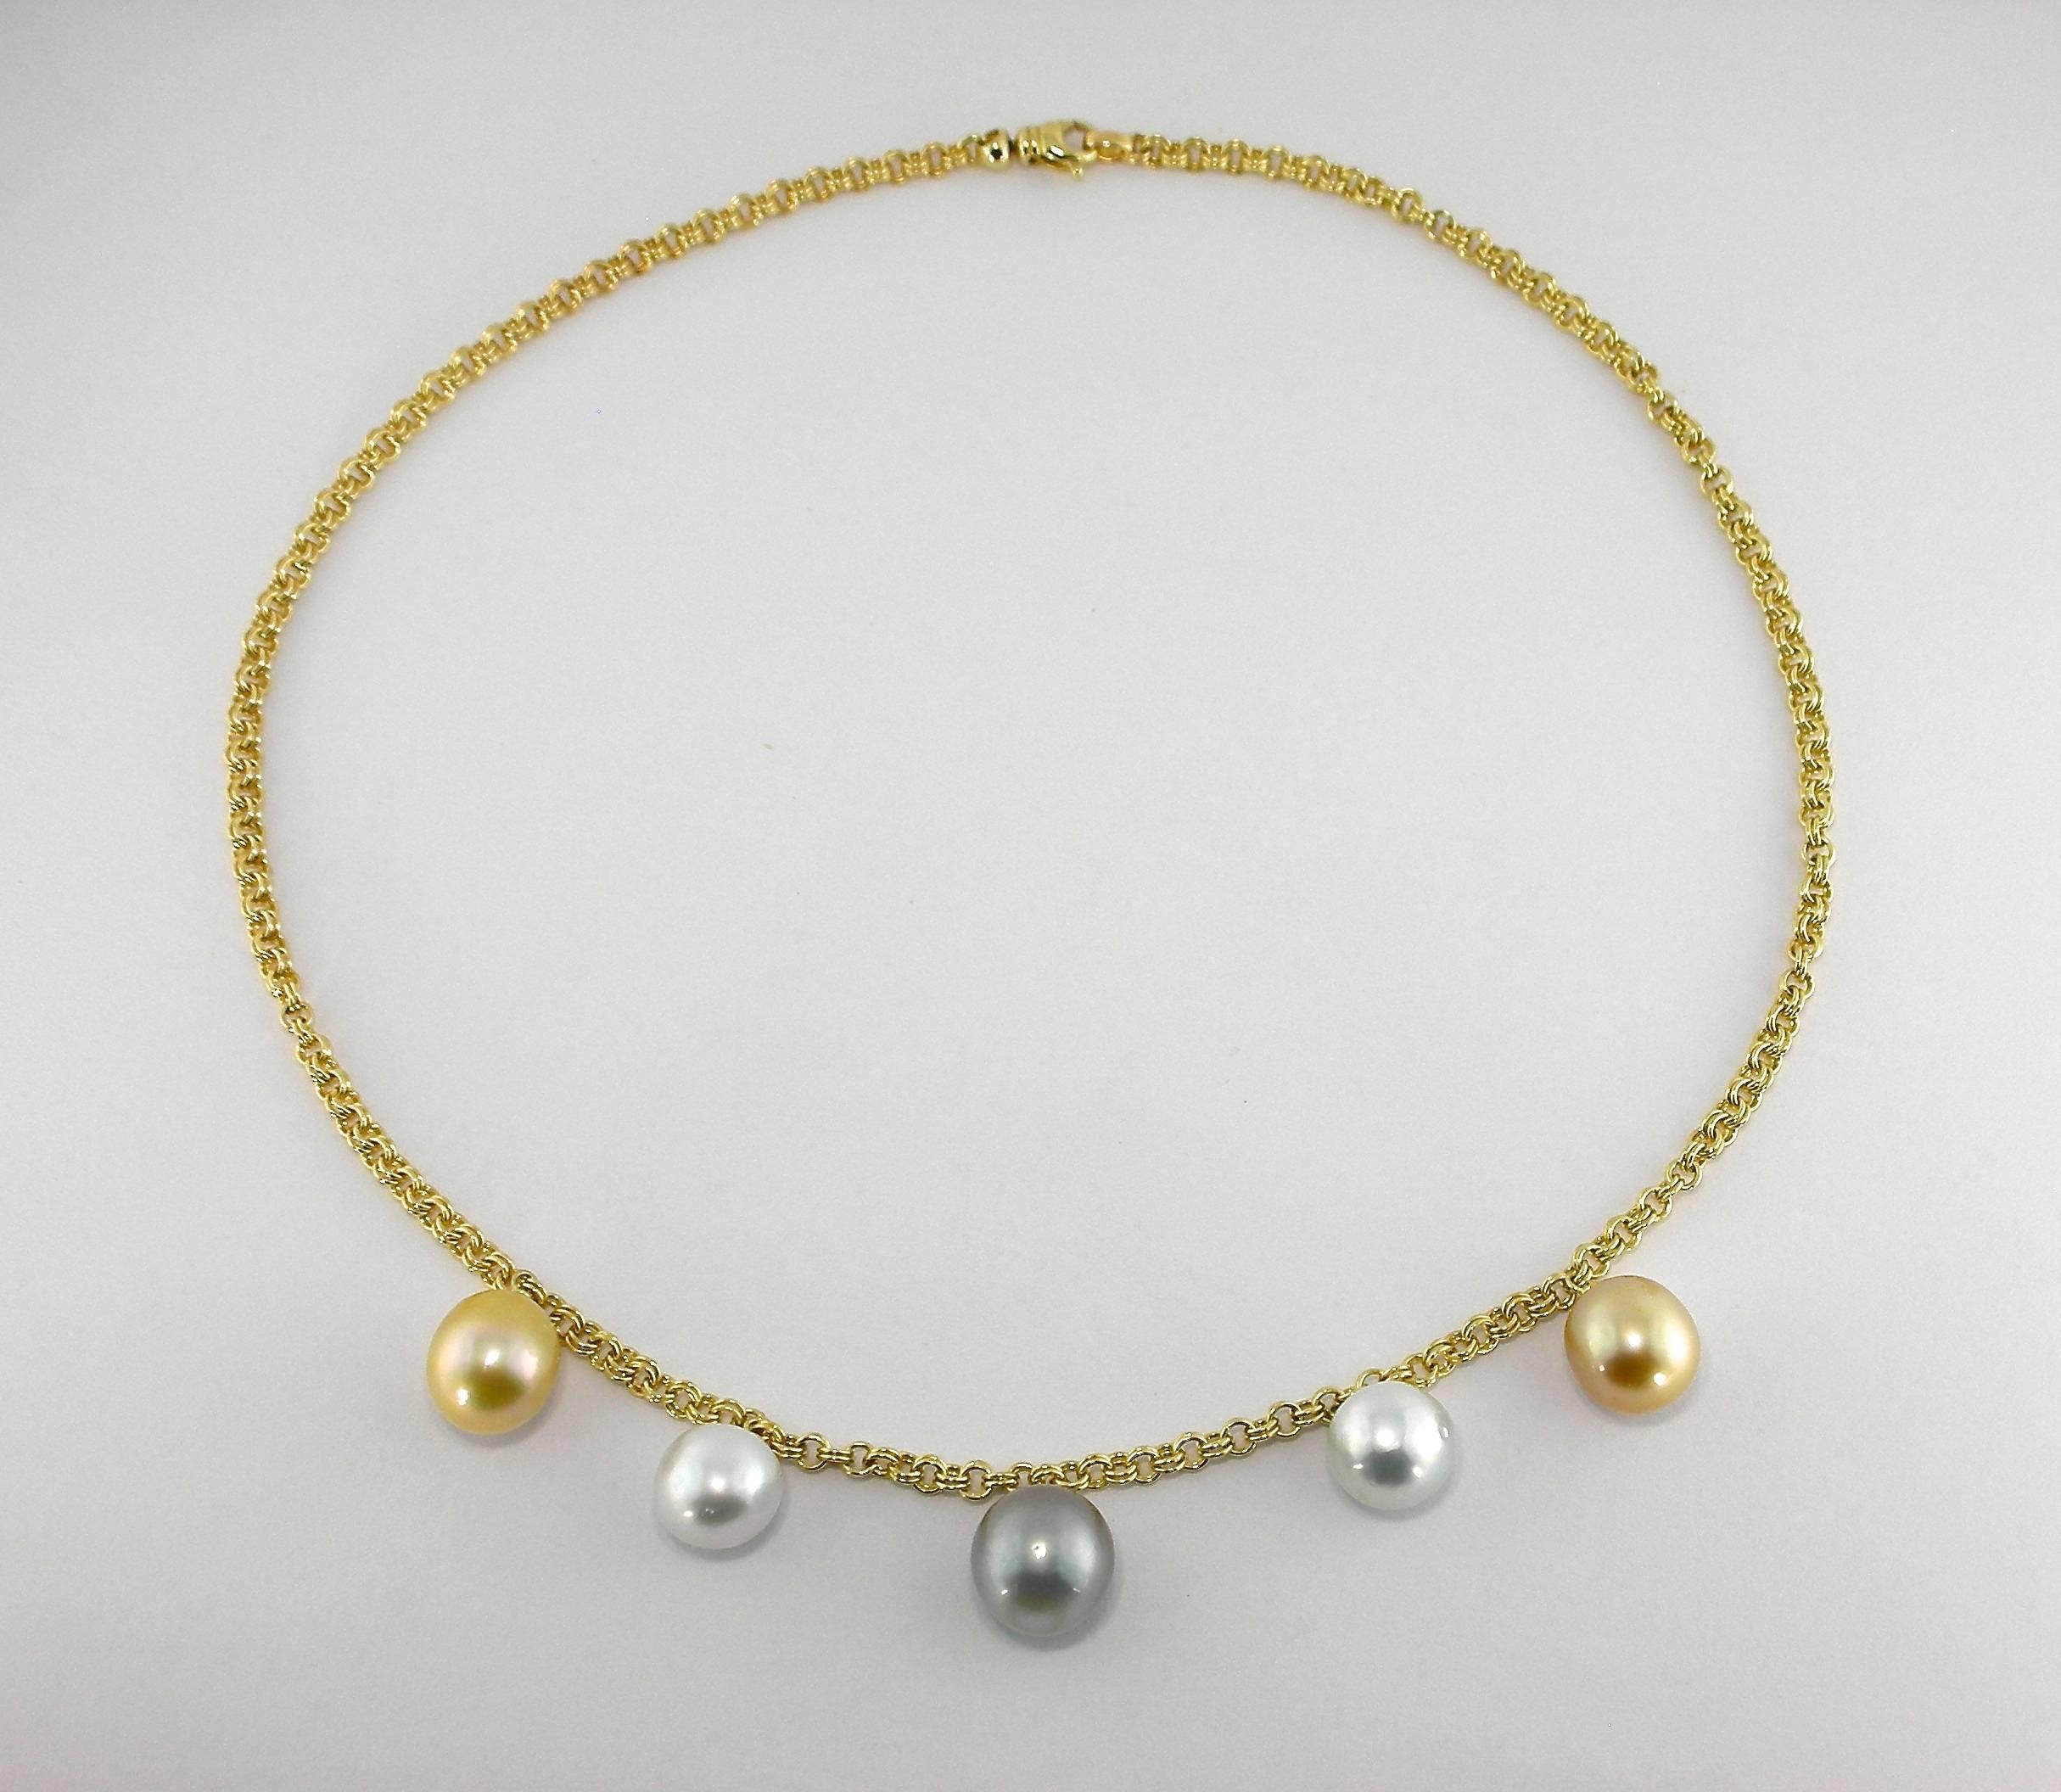 Jona design collection, hand crafted in Italy, 18 karat yellow gold chain necklace, with two golden and two white South Sea dangling pearls, centering a light grey Tahiti pearl.

All Jona jewelry is new and has never been previously owned or worn.